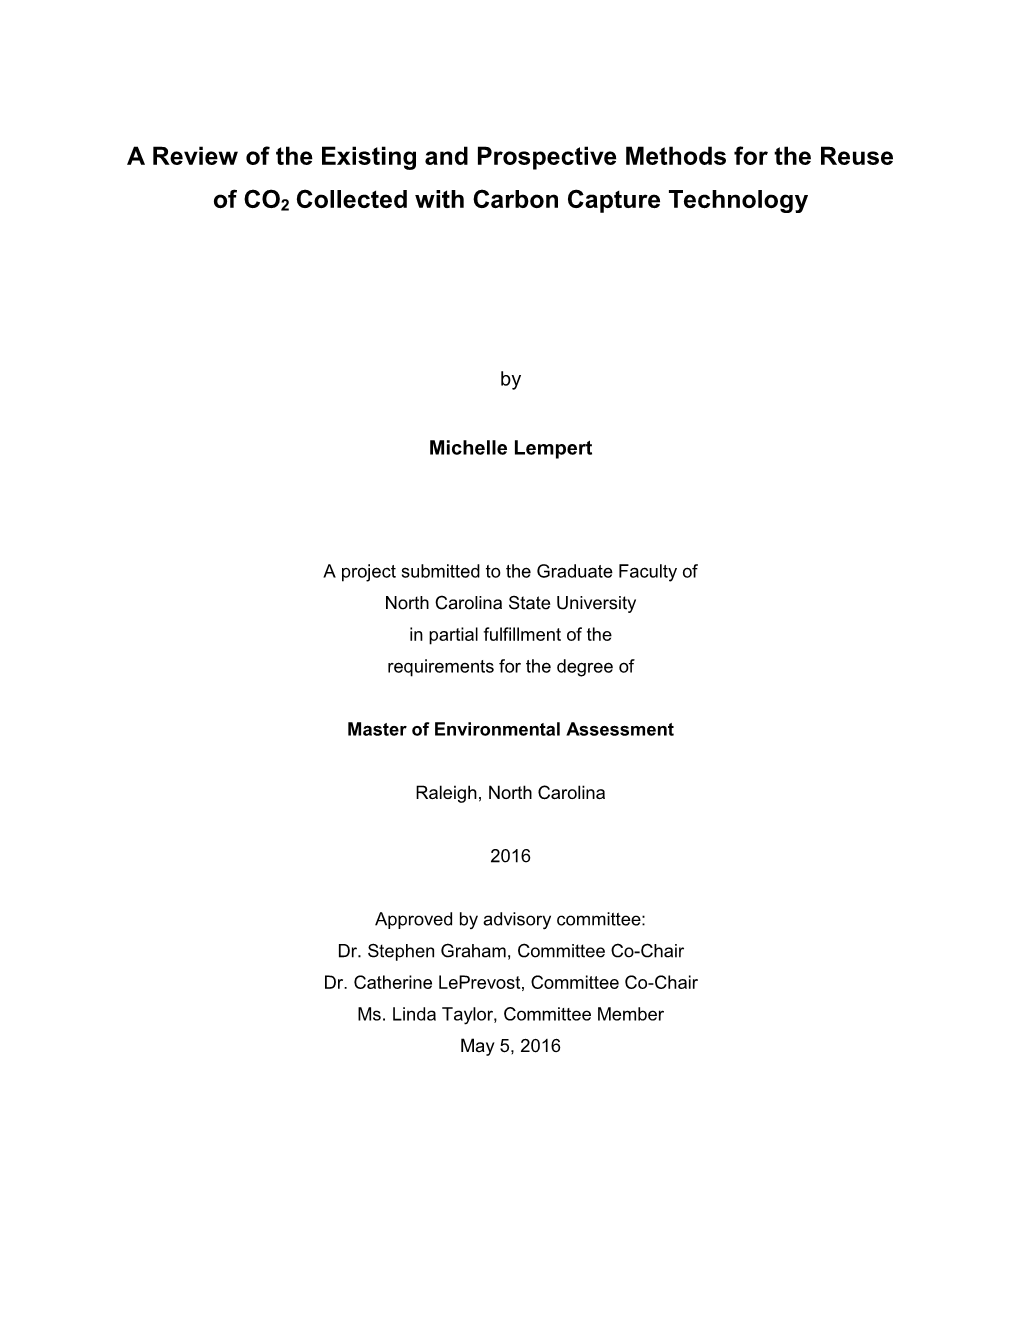 A Review of the Existing and Prospective Methods for the Reuse of CO2 Collected with Carbon Capture Technology